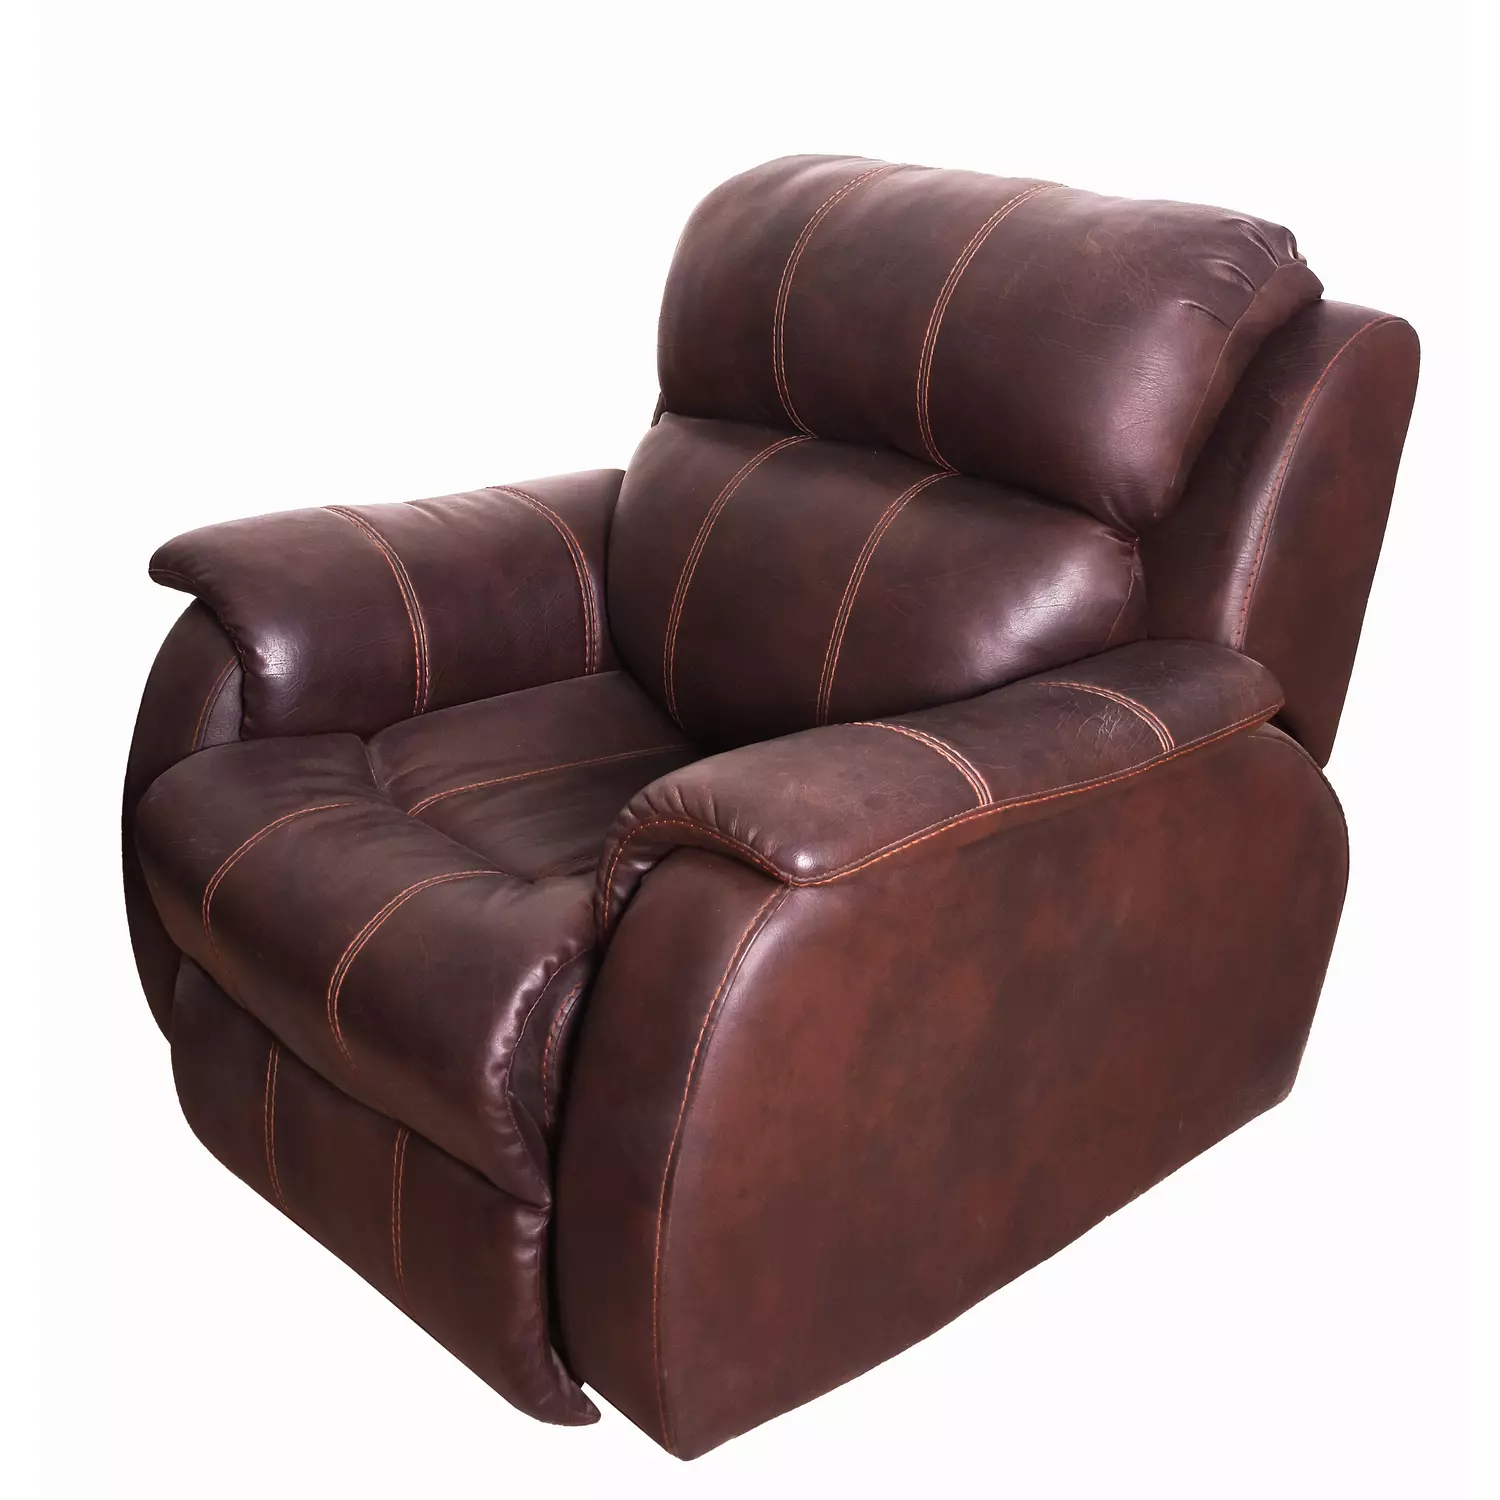 0100-21 Brown leather Lazy Boy chair hover image